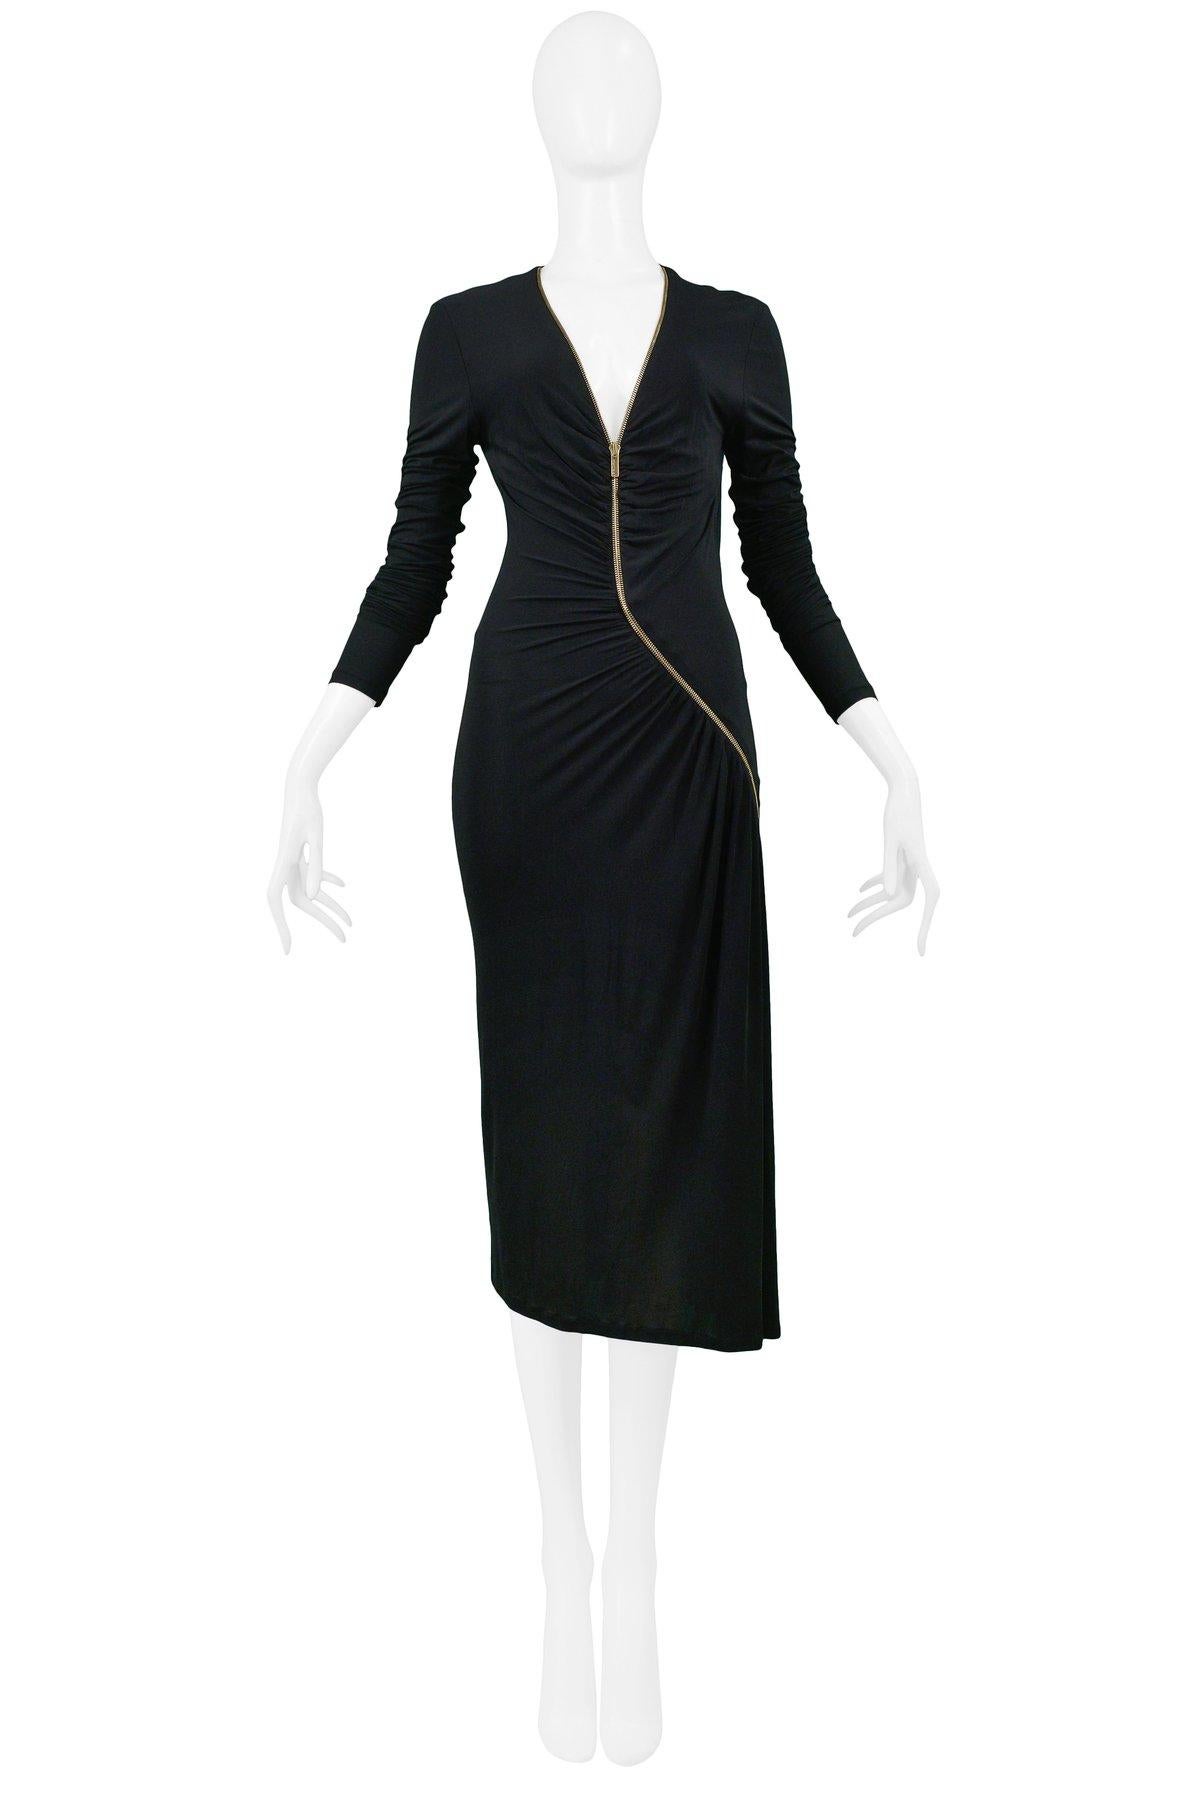 A stunning vintage Roberto Cavalli black embellished zipper dress. The dress features long sleeves, below the knee hemline, and an asymmetrical gold-tone zipper from neckline to rear hem with gathered detail.

Roberto Cavalli
Size Large
4% Elastane,